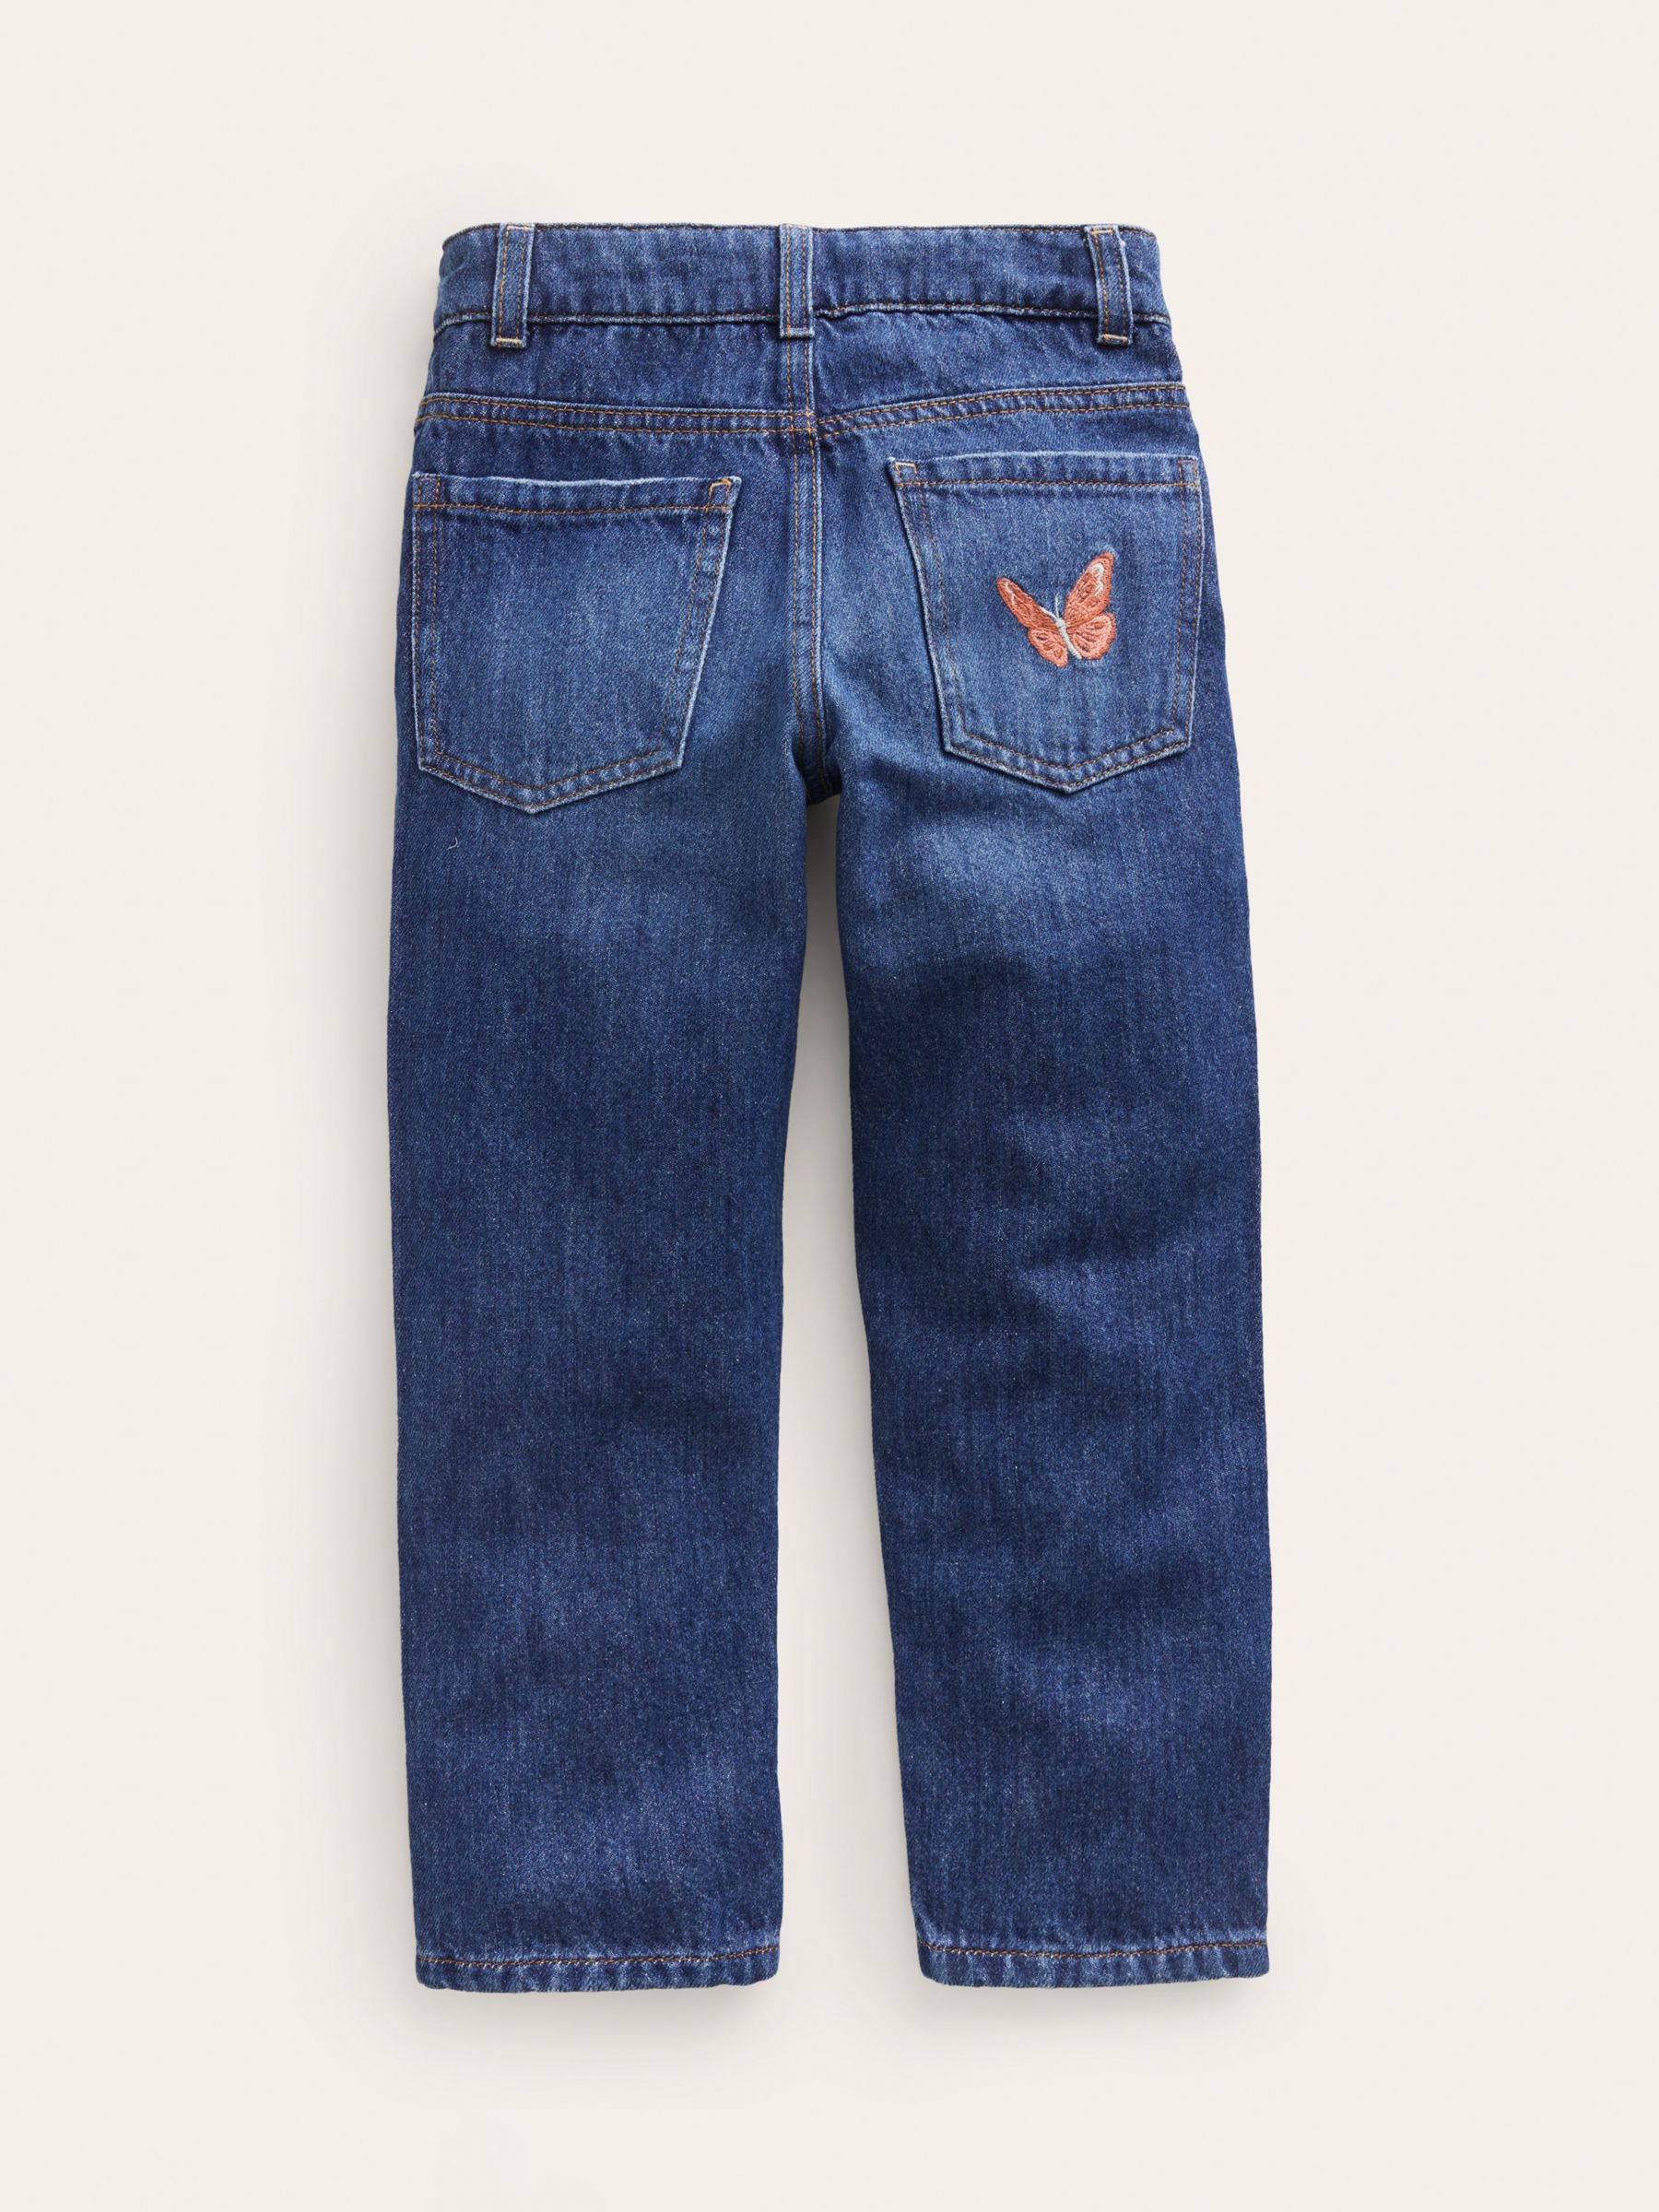 Mini Boden Kids' Butterfly Jeans, Mid Vintage, 3 years